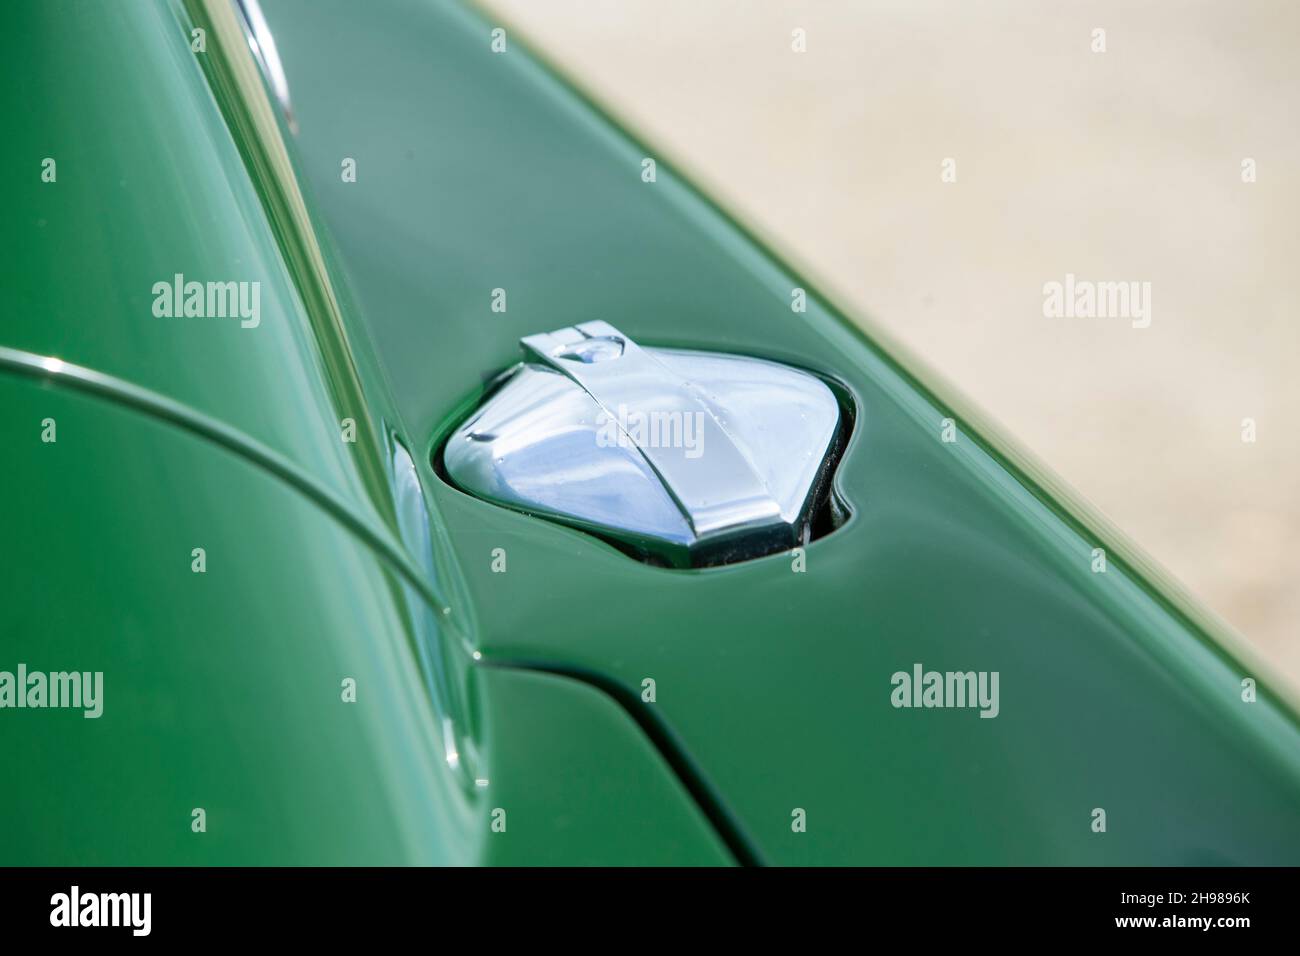 Petrol filler cap of a 1961 Aston Martin DB4 GT previously owned by Donald Campbell. Stock Photo